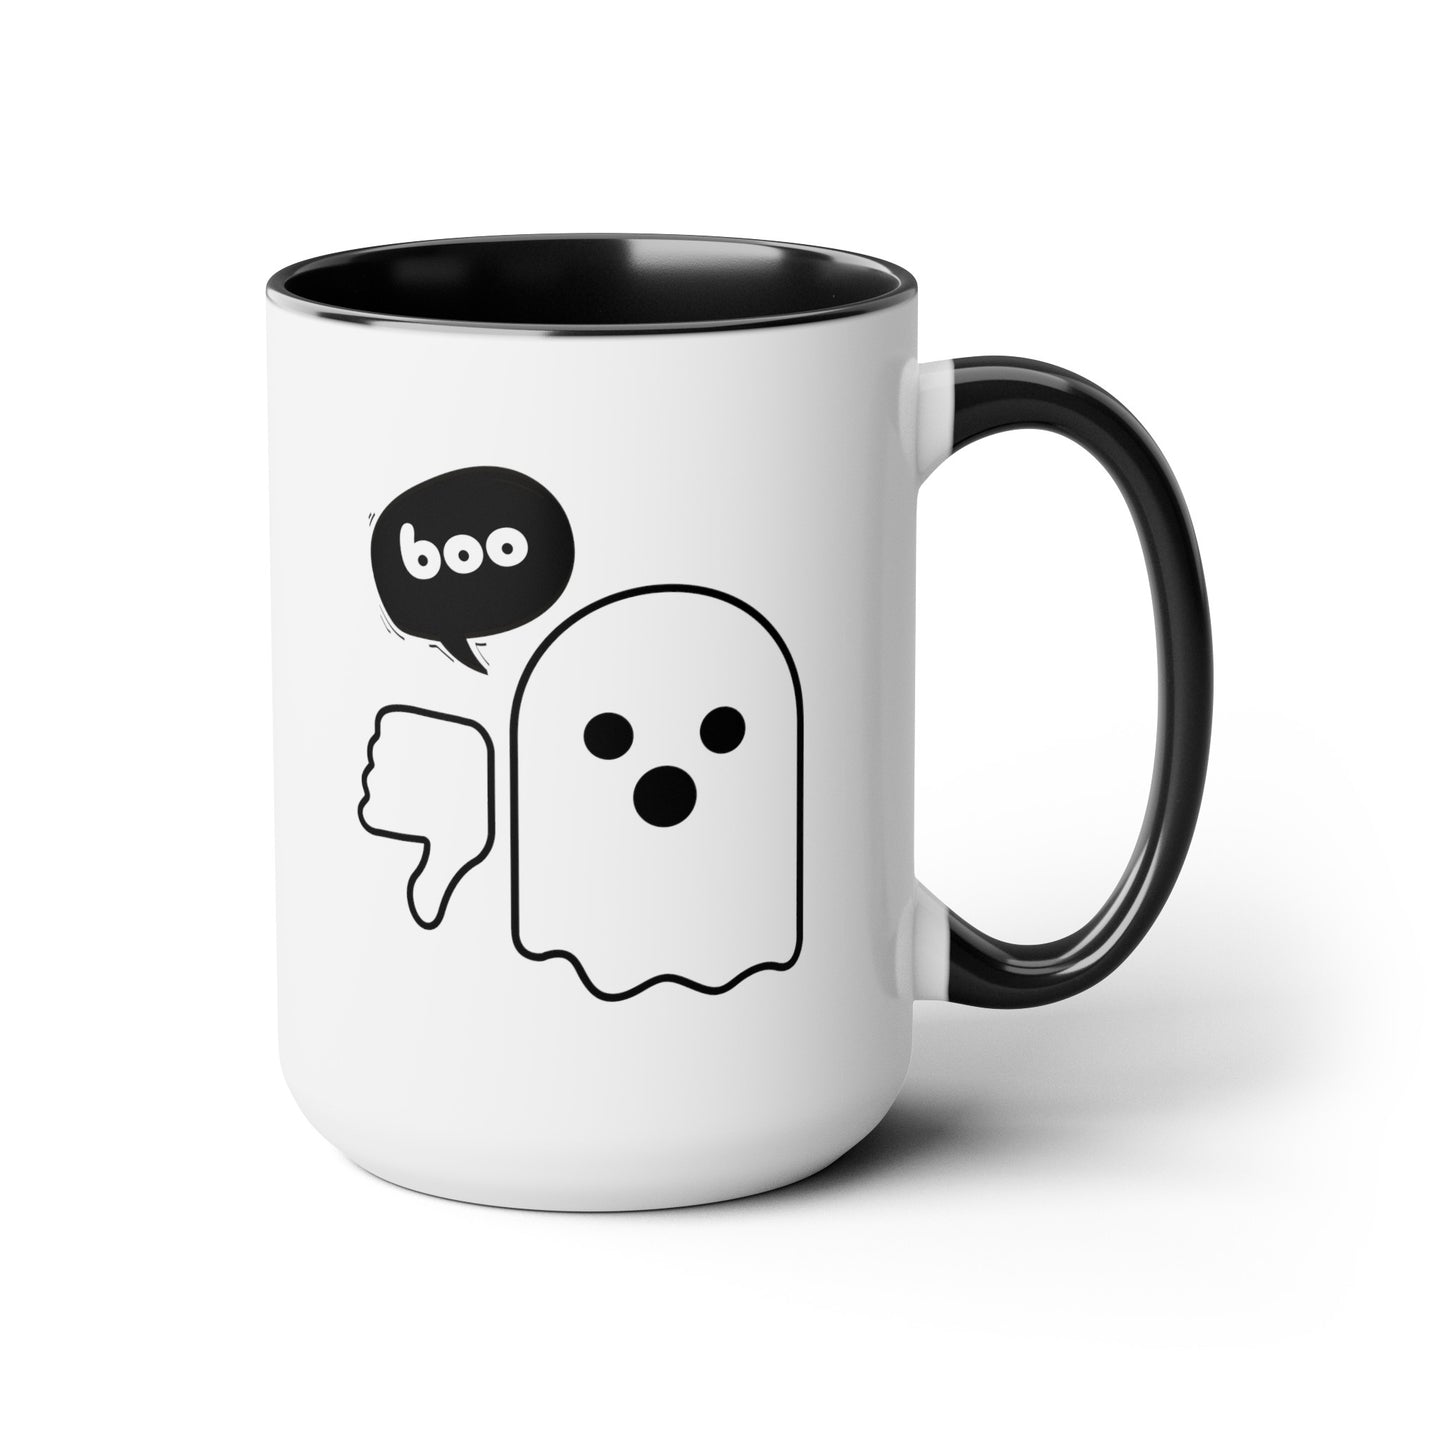 Boo Ghost Of Disapproval 15oz white with black accent funny large coffee mug gift for halloween spooky season friend disapproving waveywares wavey wares wavywares wavy wares